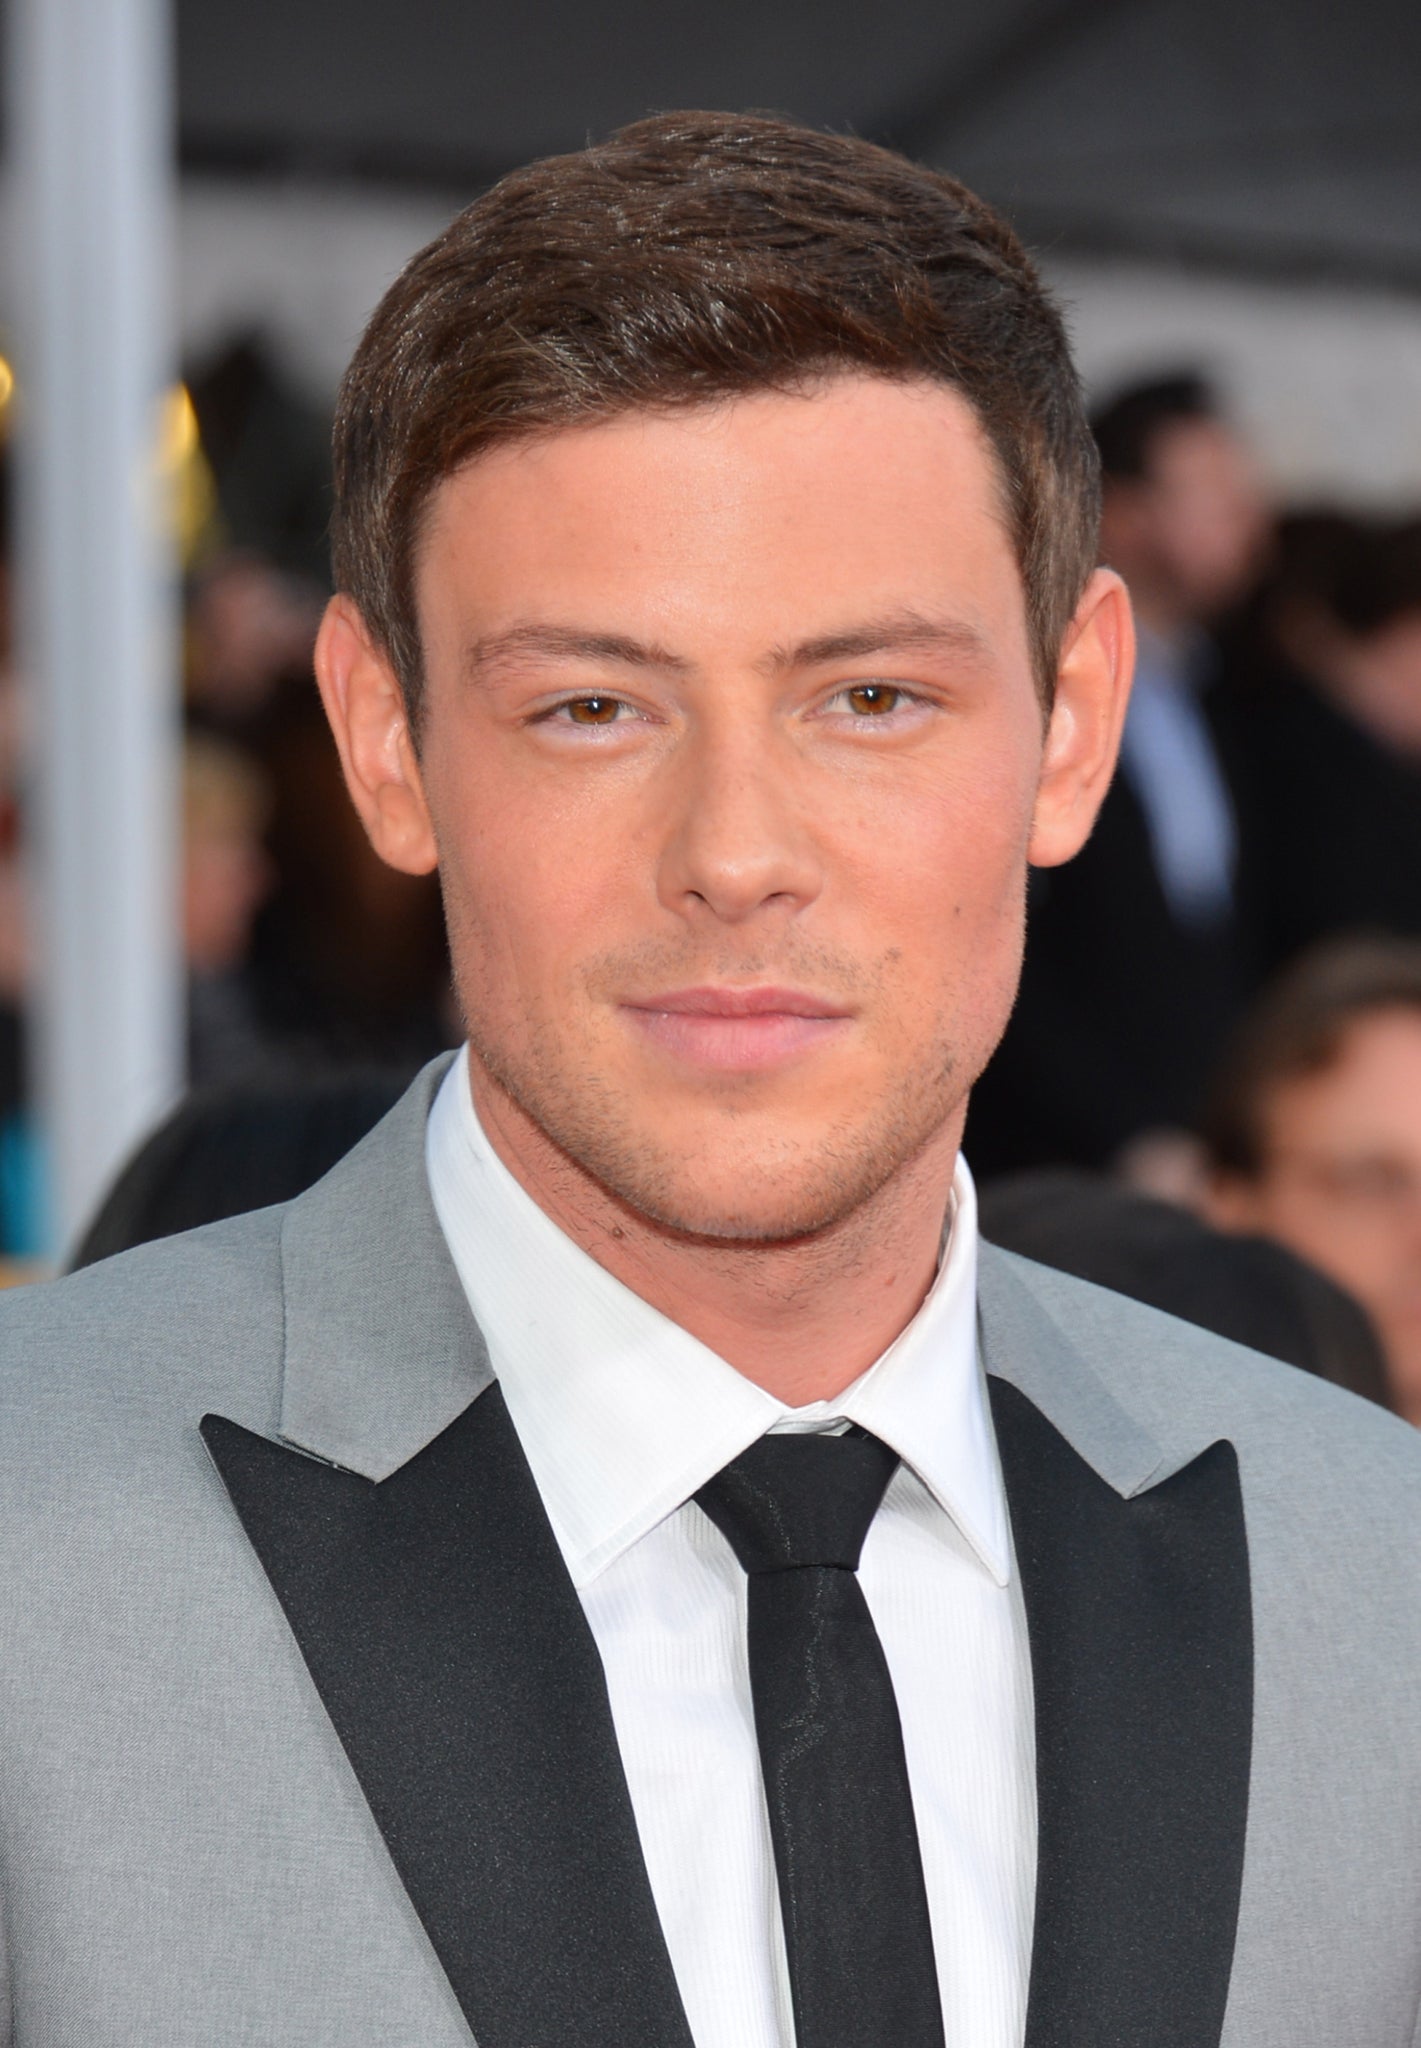 Cory Monteith who plays Finn in Glee